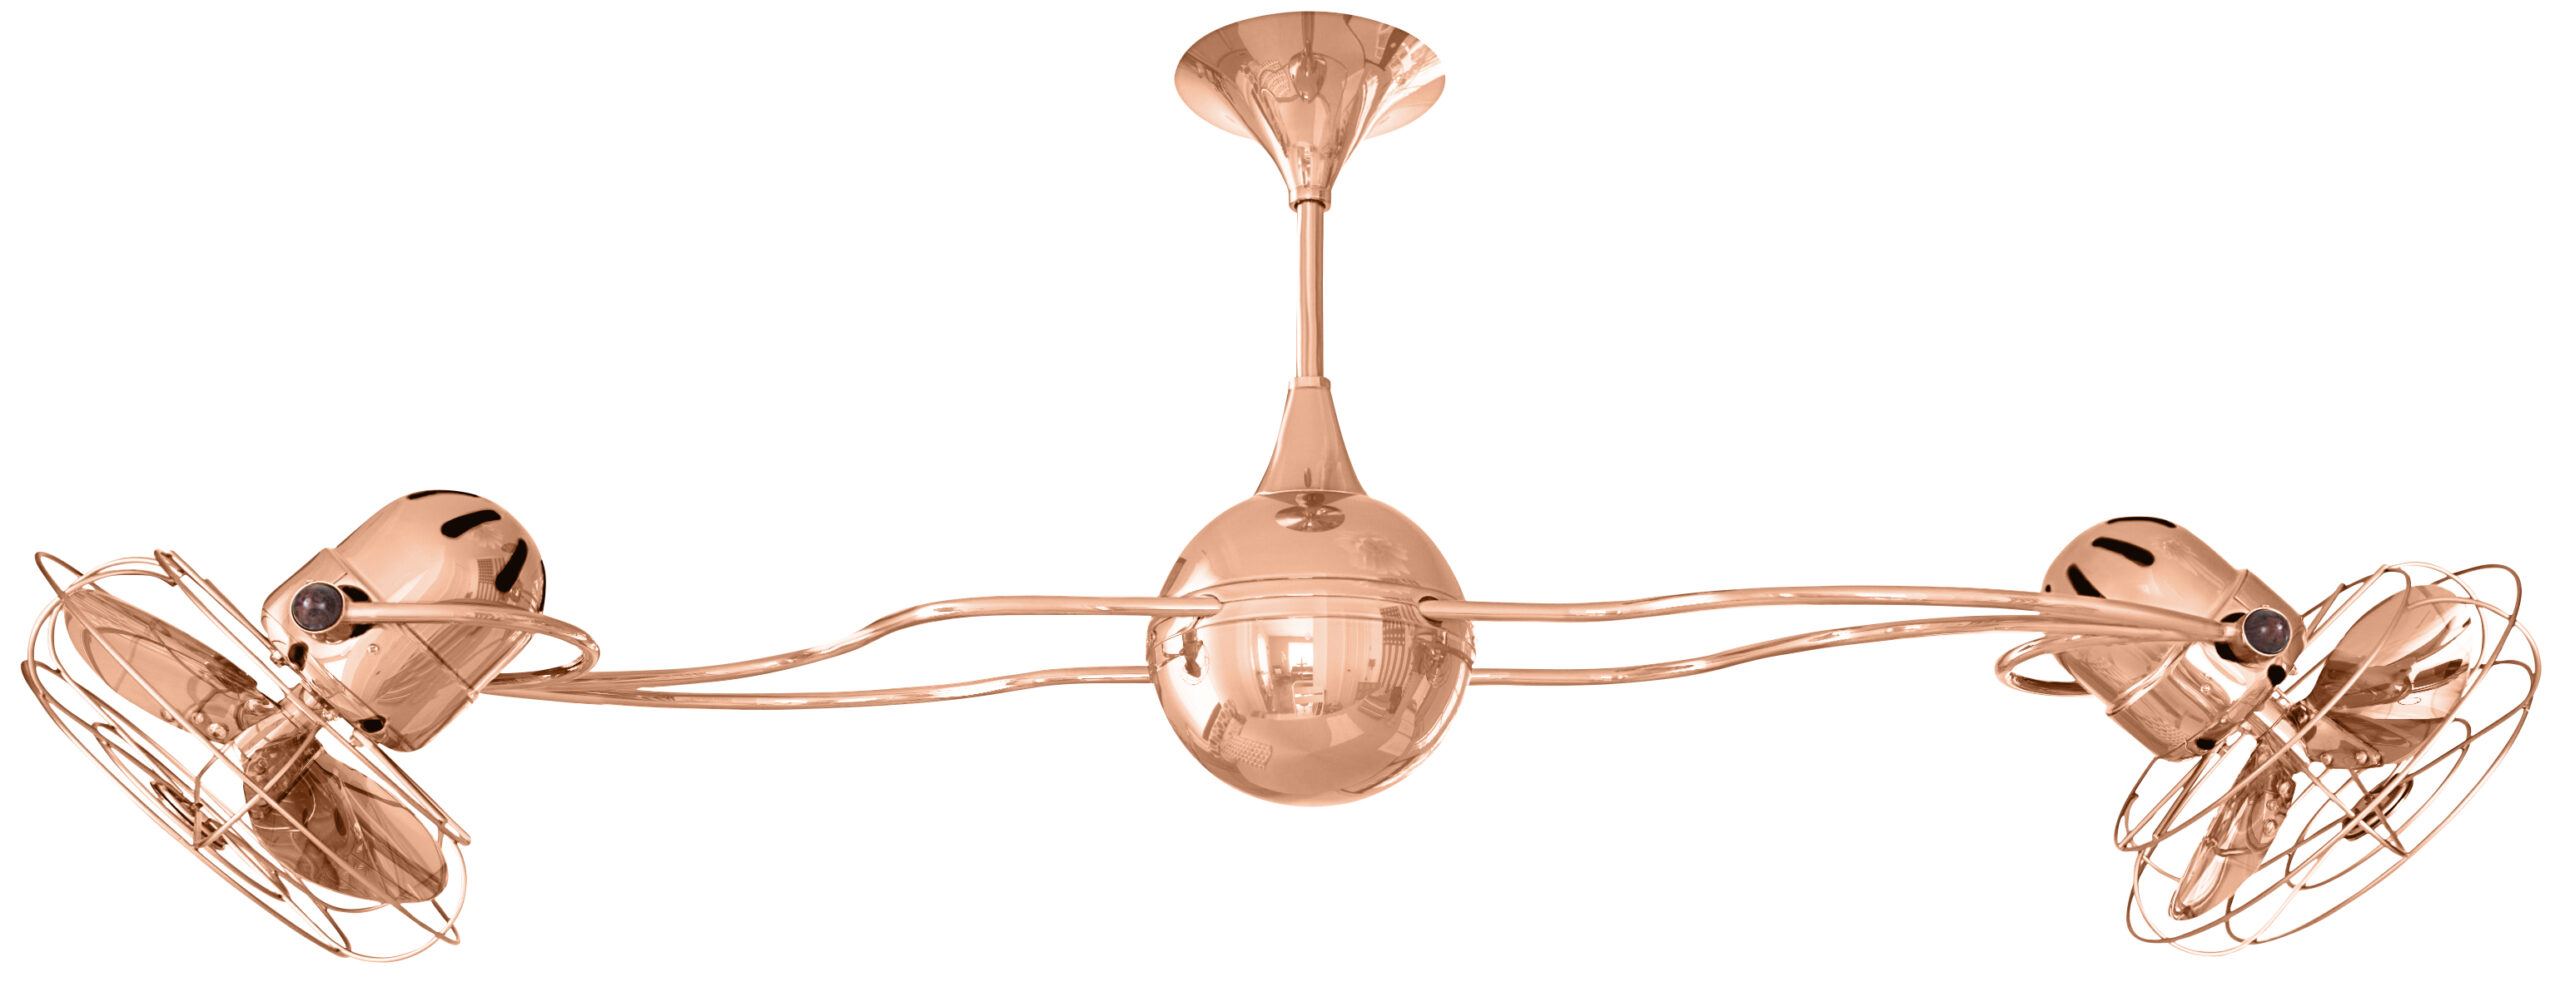 Italo Ventania in polished copper with metal blades in decorative cages